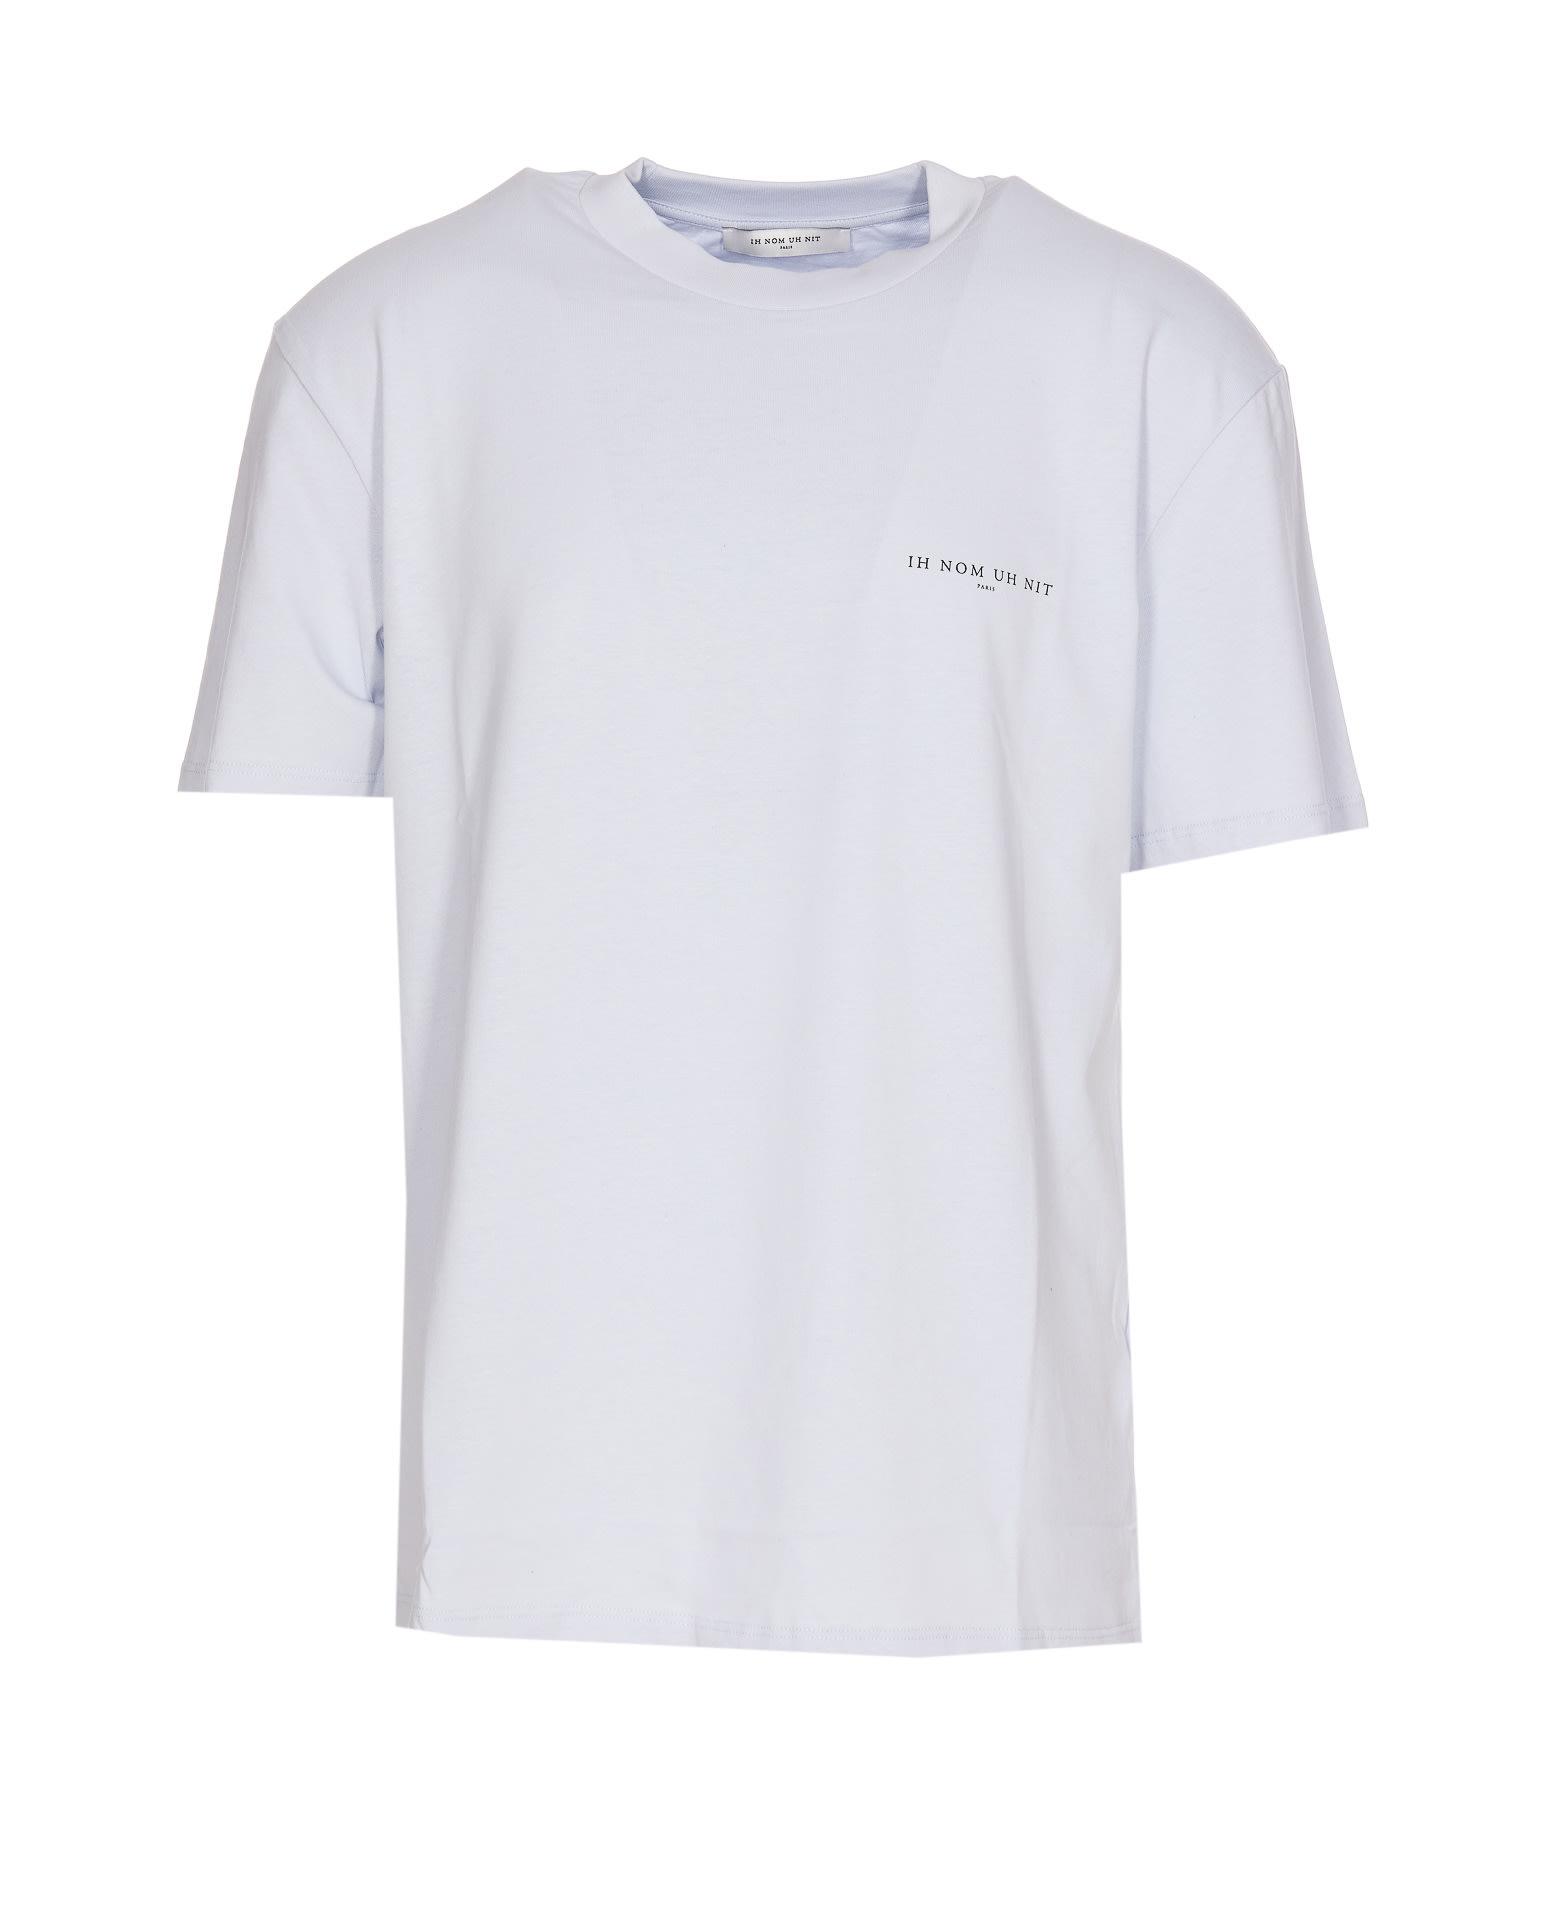 ih nom uh nit Mask Authentic Logo T-shirt in White for Men | Lyst